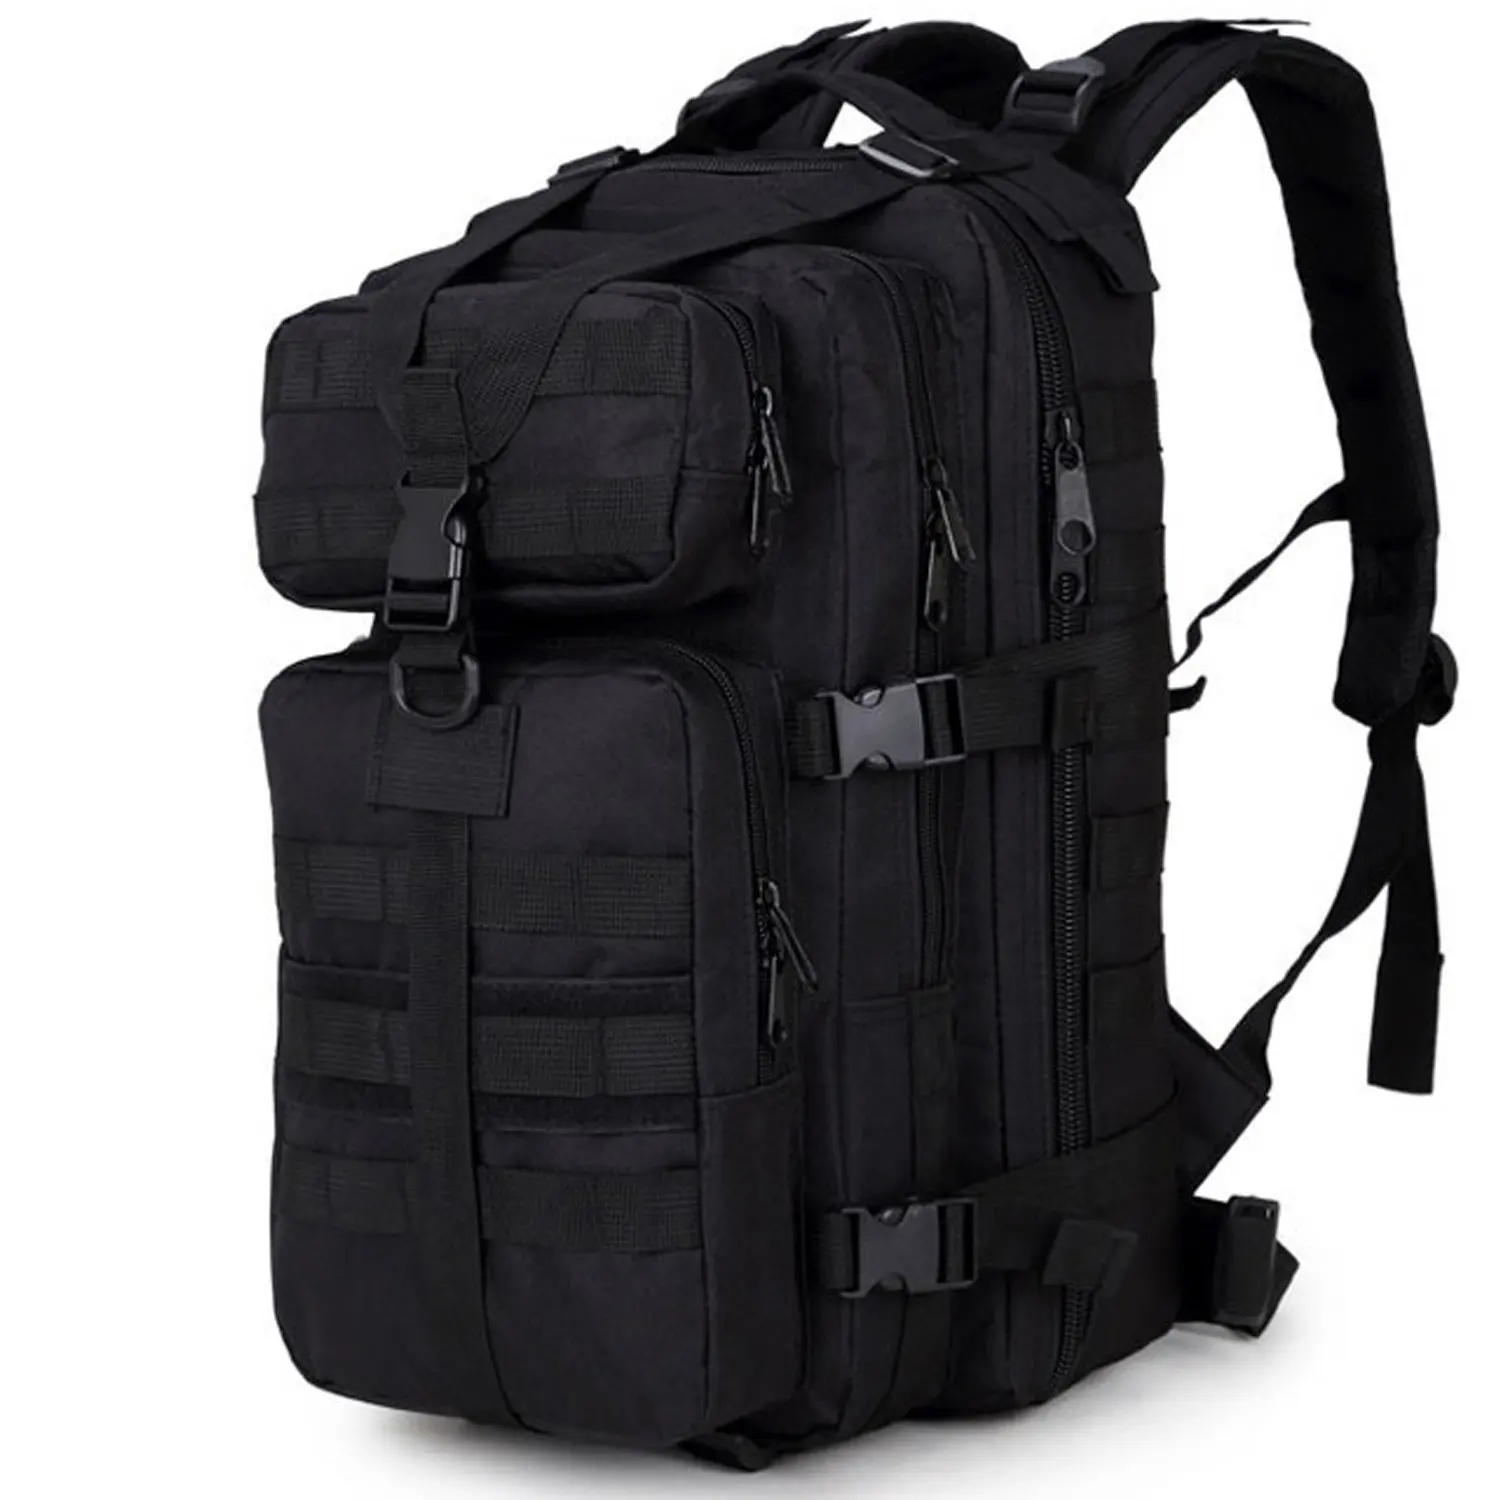 Cheap Tad Tactical Backpack, find Tad Tactical Backpack deals on line ...